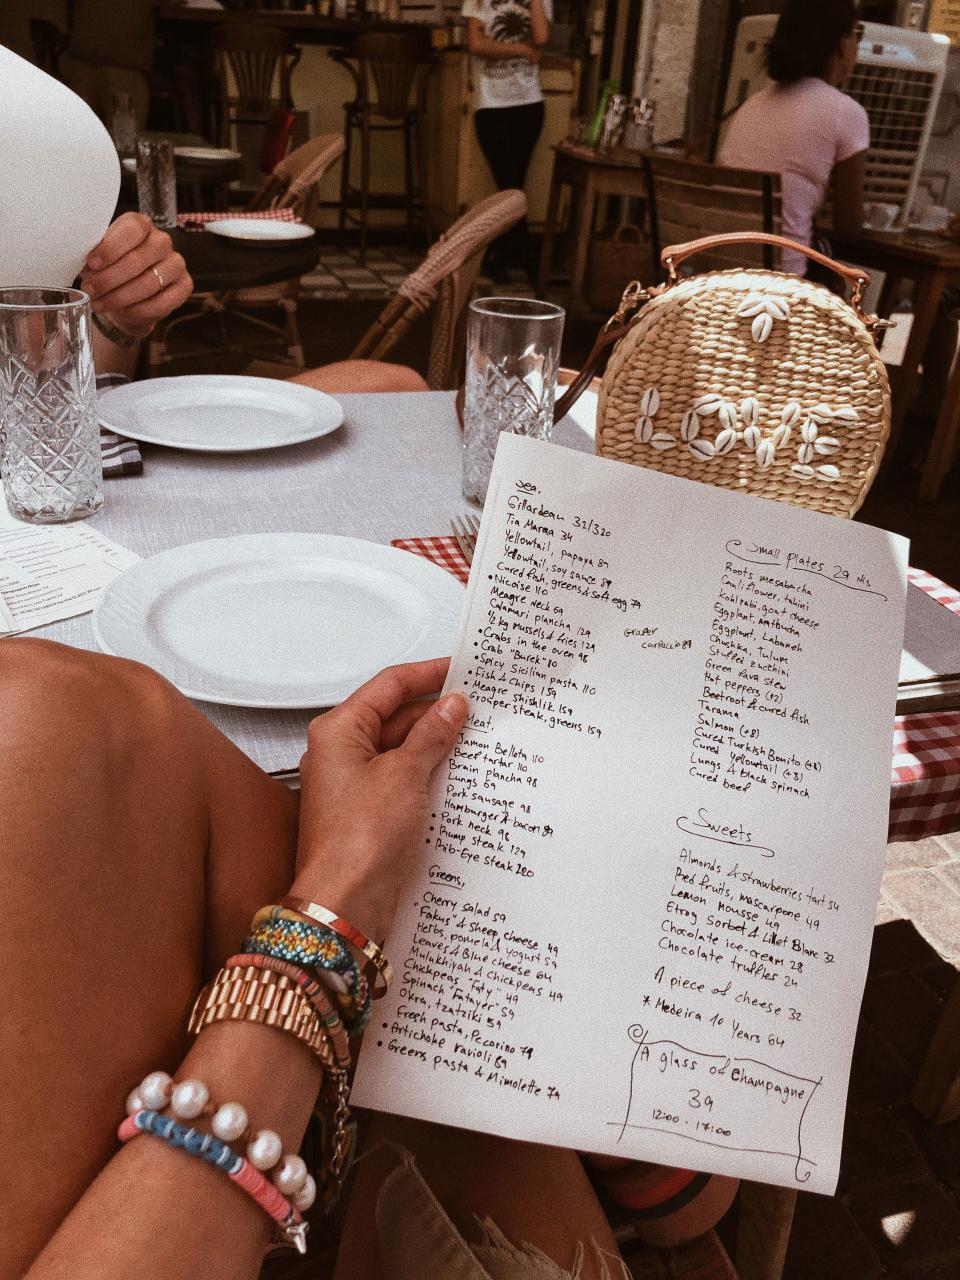 We’ve landed in Tel Aviv! This is the menu at the most charming little lunch spot, Habasta.